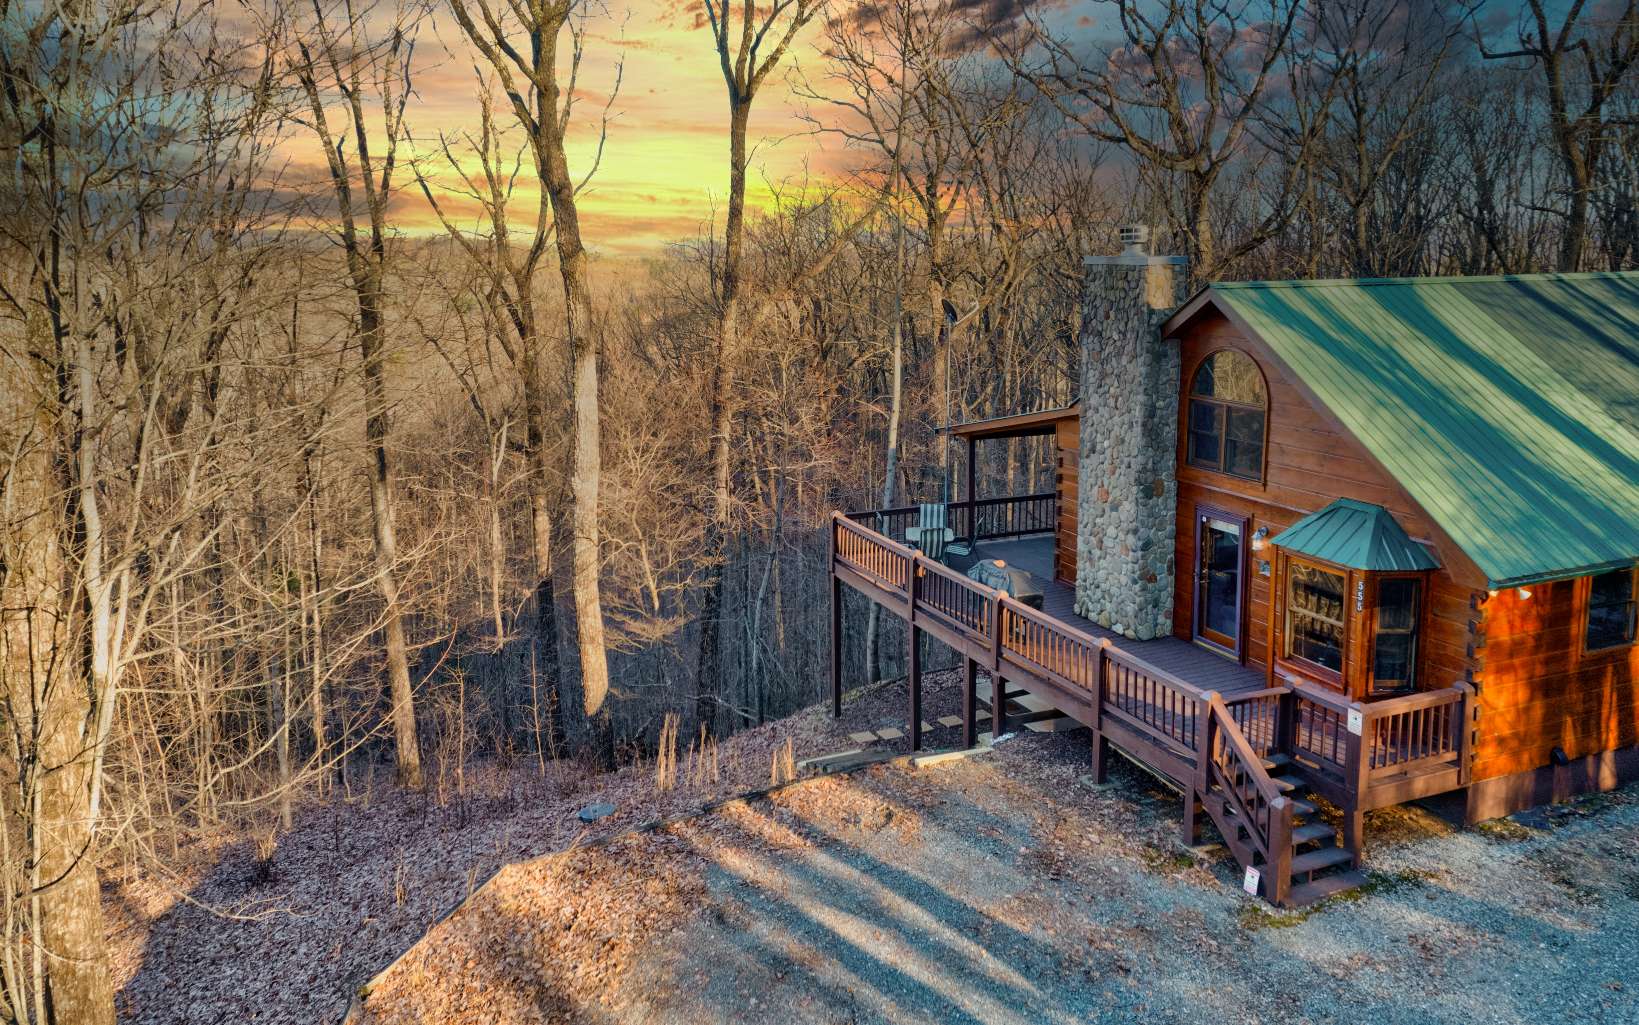 Year round Long Range Mountain Views! This Cabin is down a beautiful mountain road bordering Fightingtown Creek Nature Park. Take a walk or mountain bike ride down the trail! Snuggle up next to the Real Rock Fireplace. Enjoy a wreck room downstairs, and a Hot Tub! Large covered Porches to enjoy the Amazingly BIG VIEWS! Two Bedrooms and Two bathrooms on the main level. Full bath downstairs and 3rd bedroom downstairs. Heating and air are run to the attic for future kids sleeping loft. STR ok, turn key.